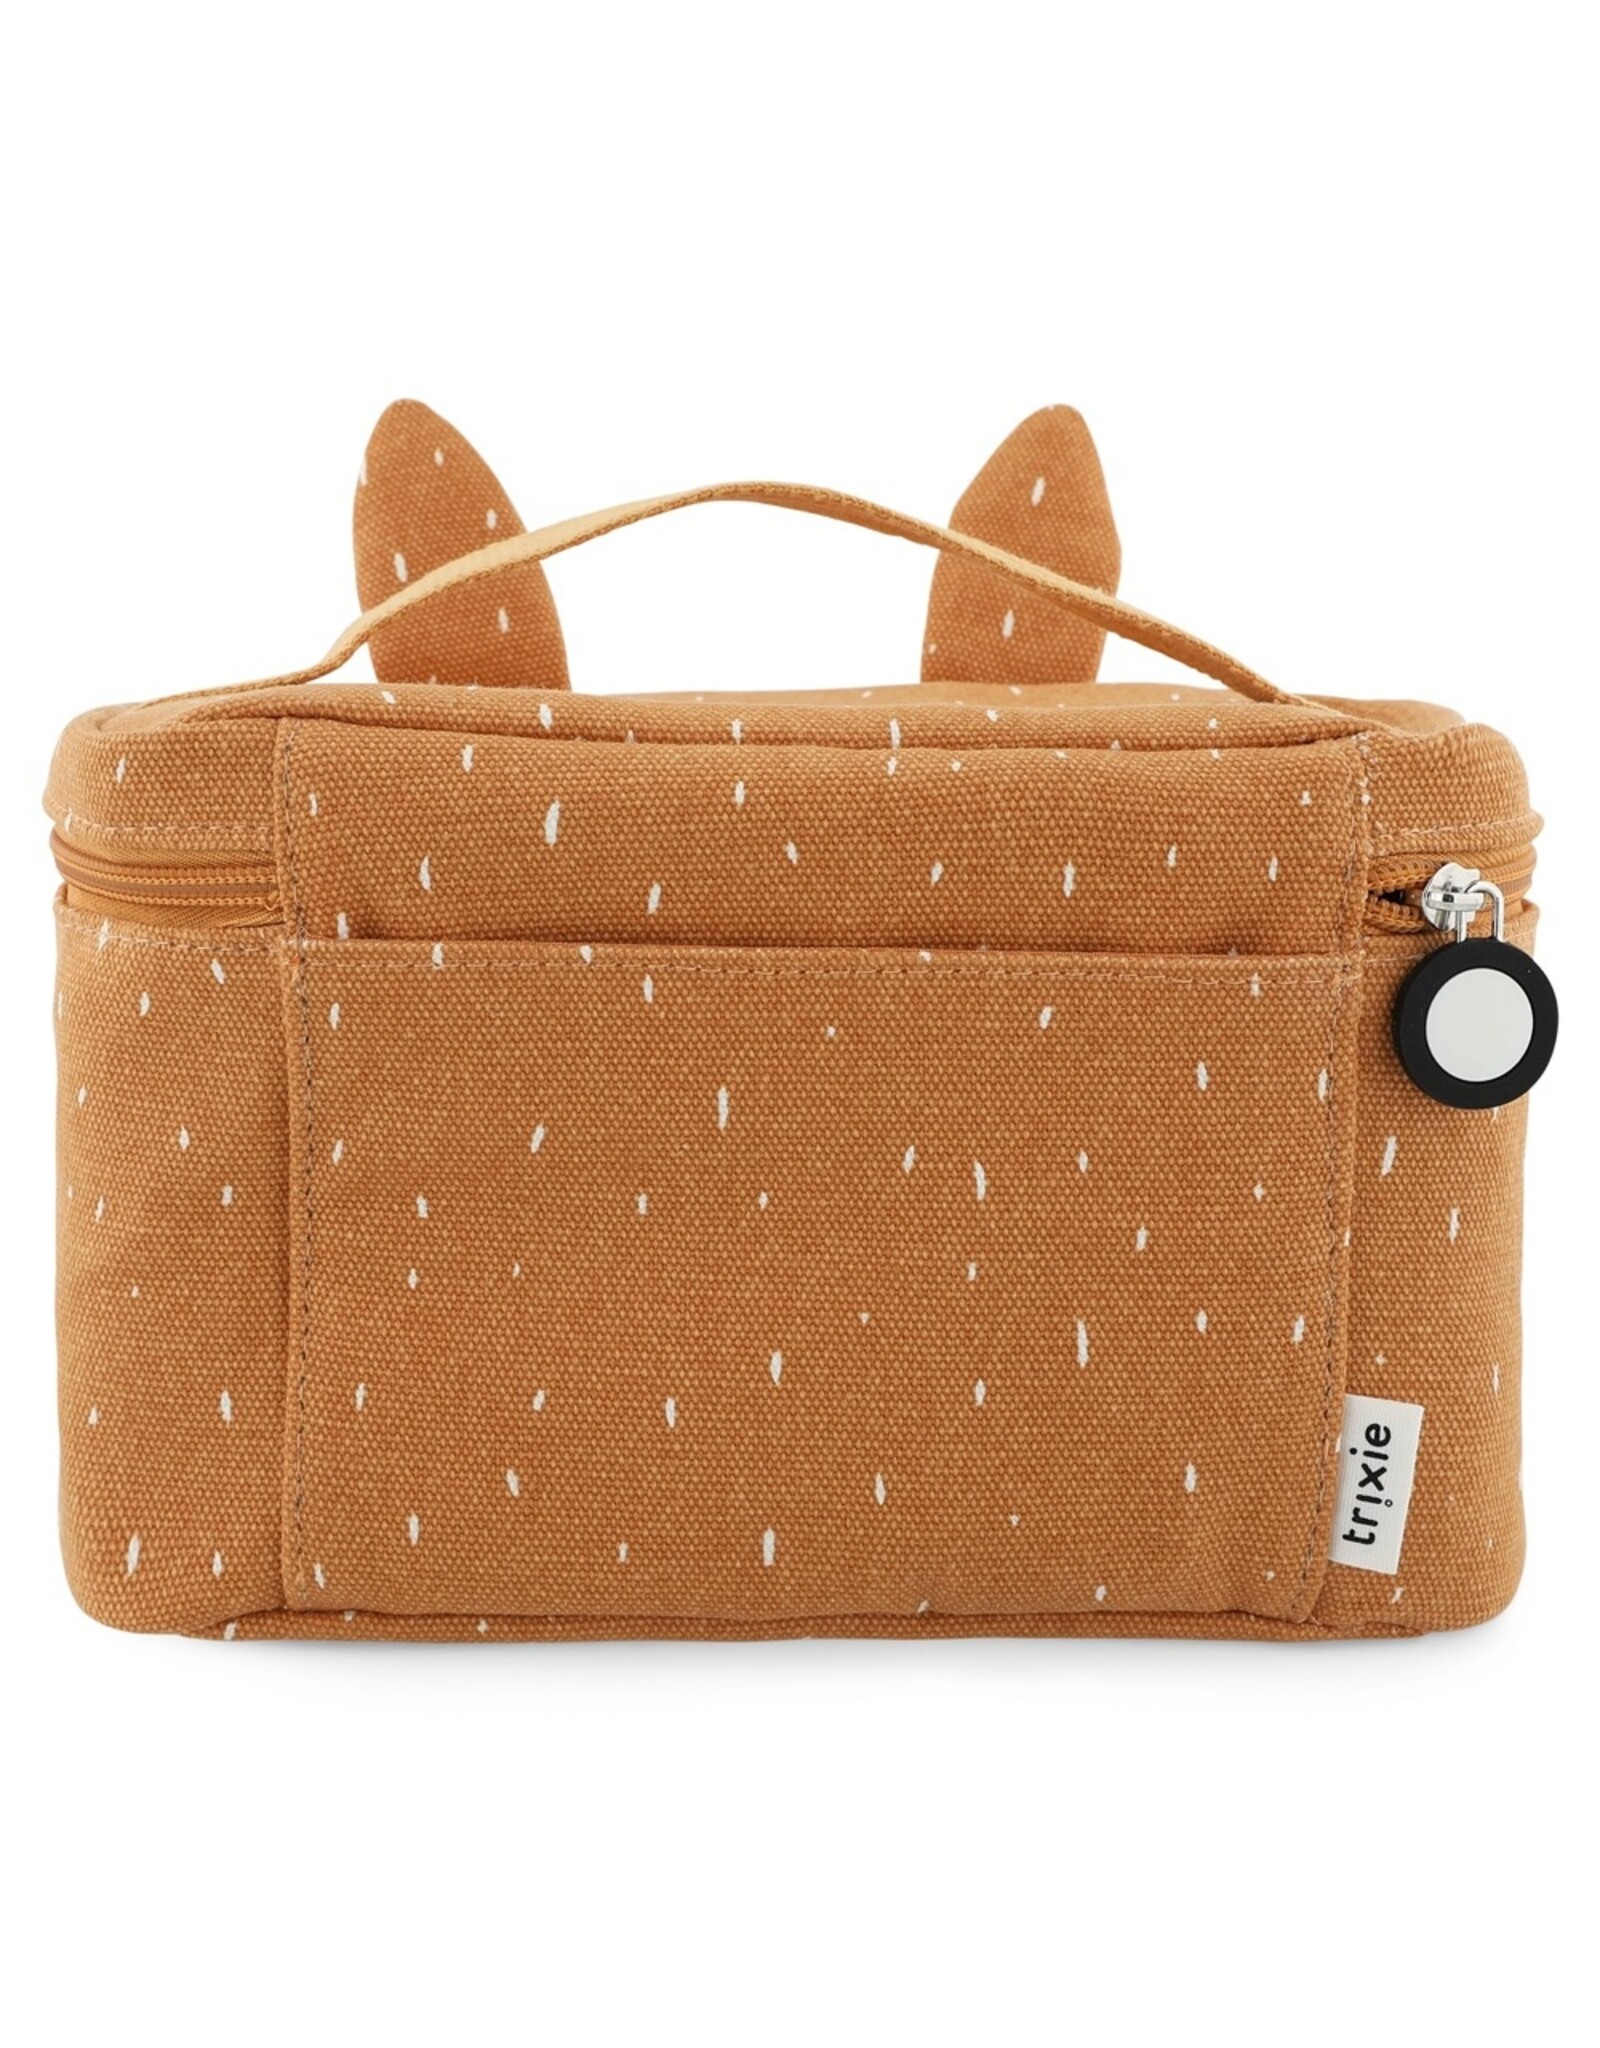 Trixie Sac repas isotherme - Mr Fox